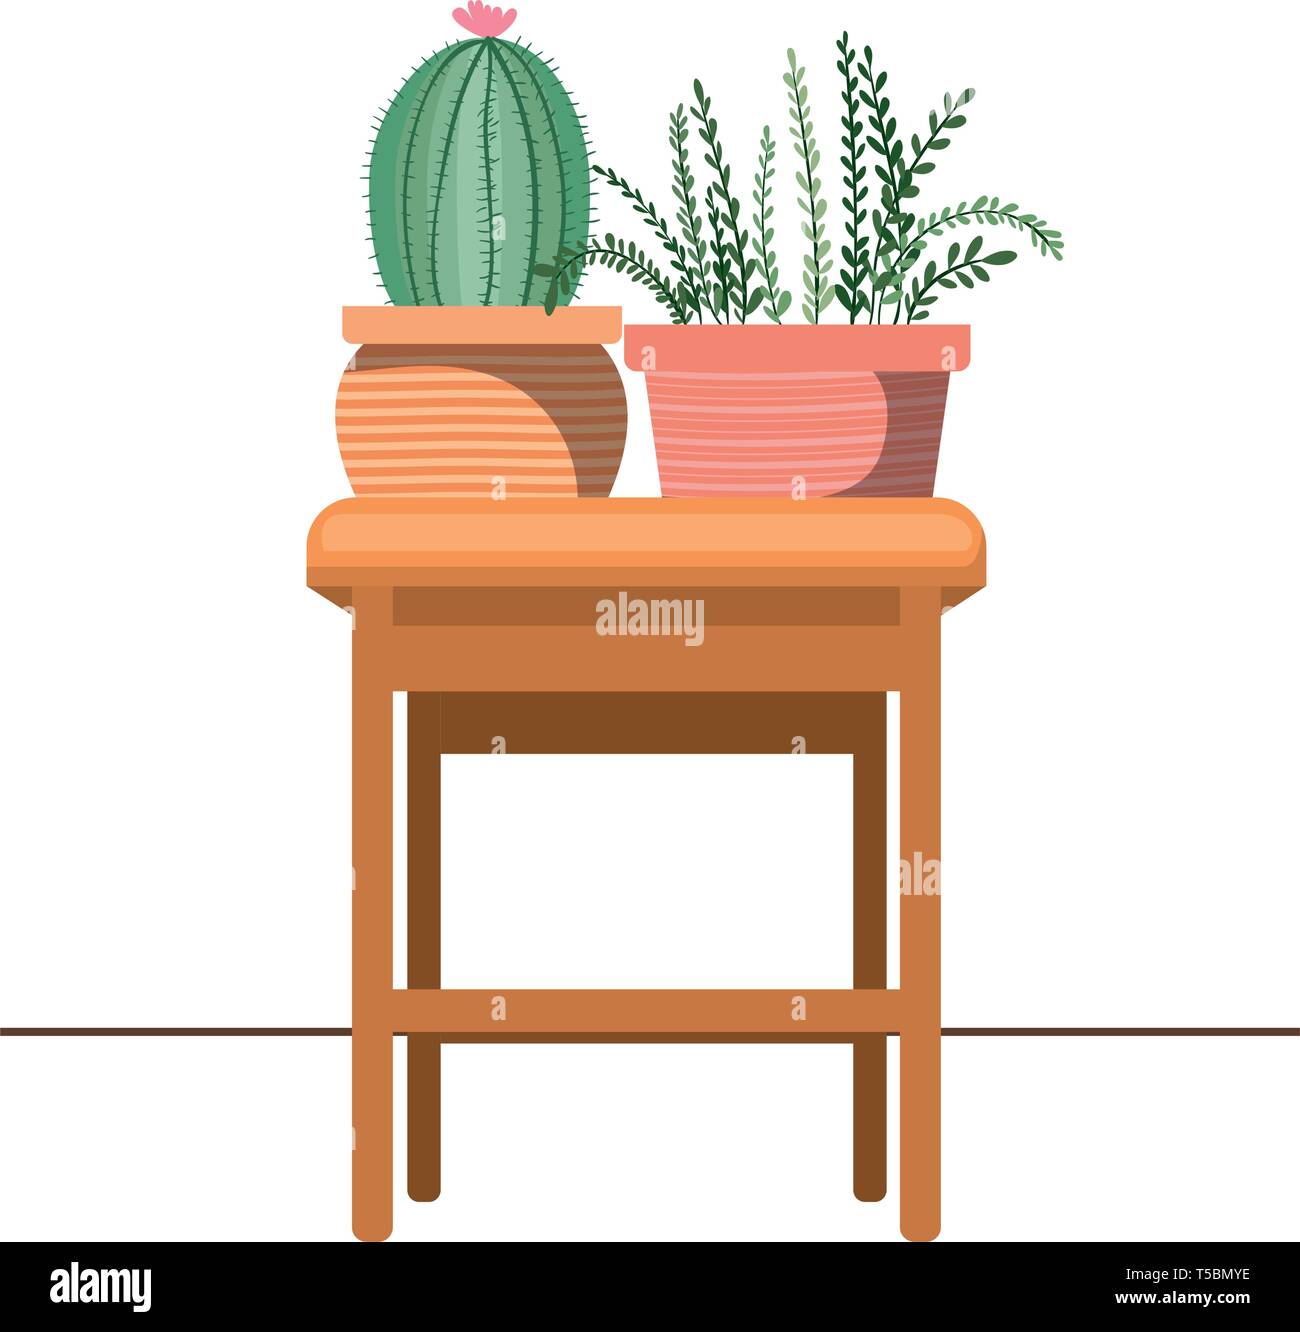 cactus with potted on the table icon Stock Vector